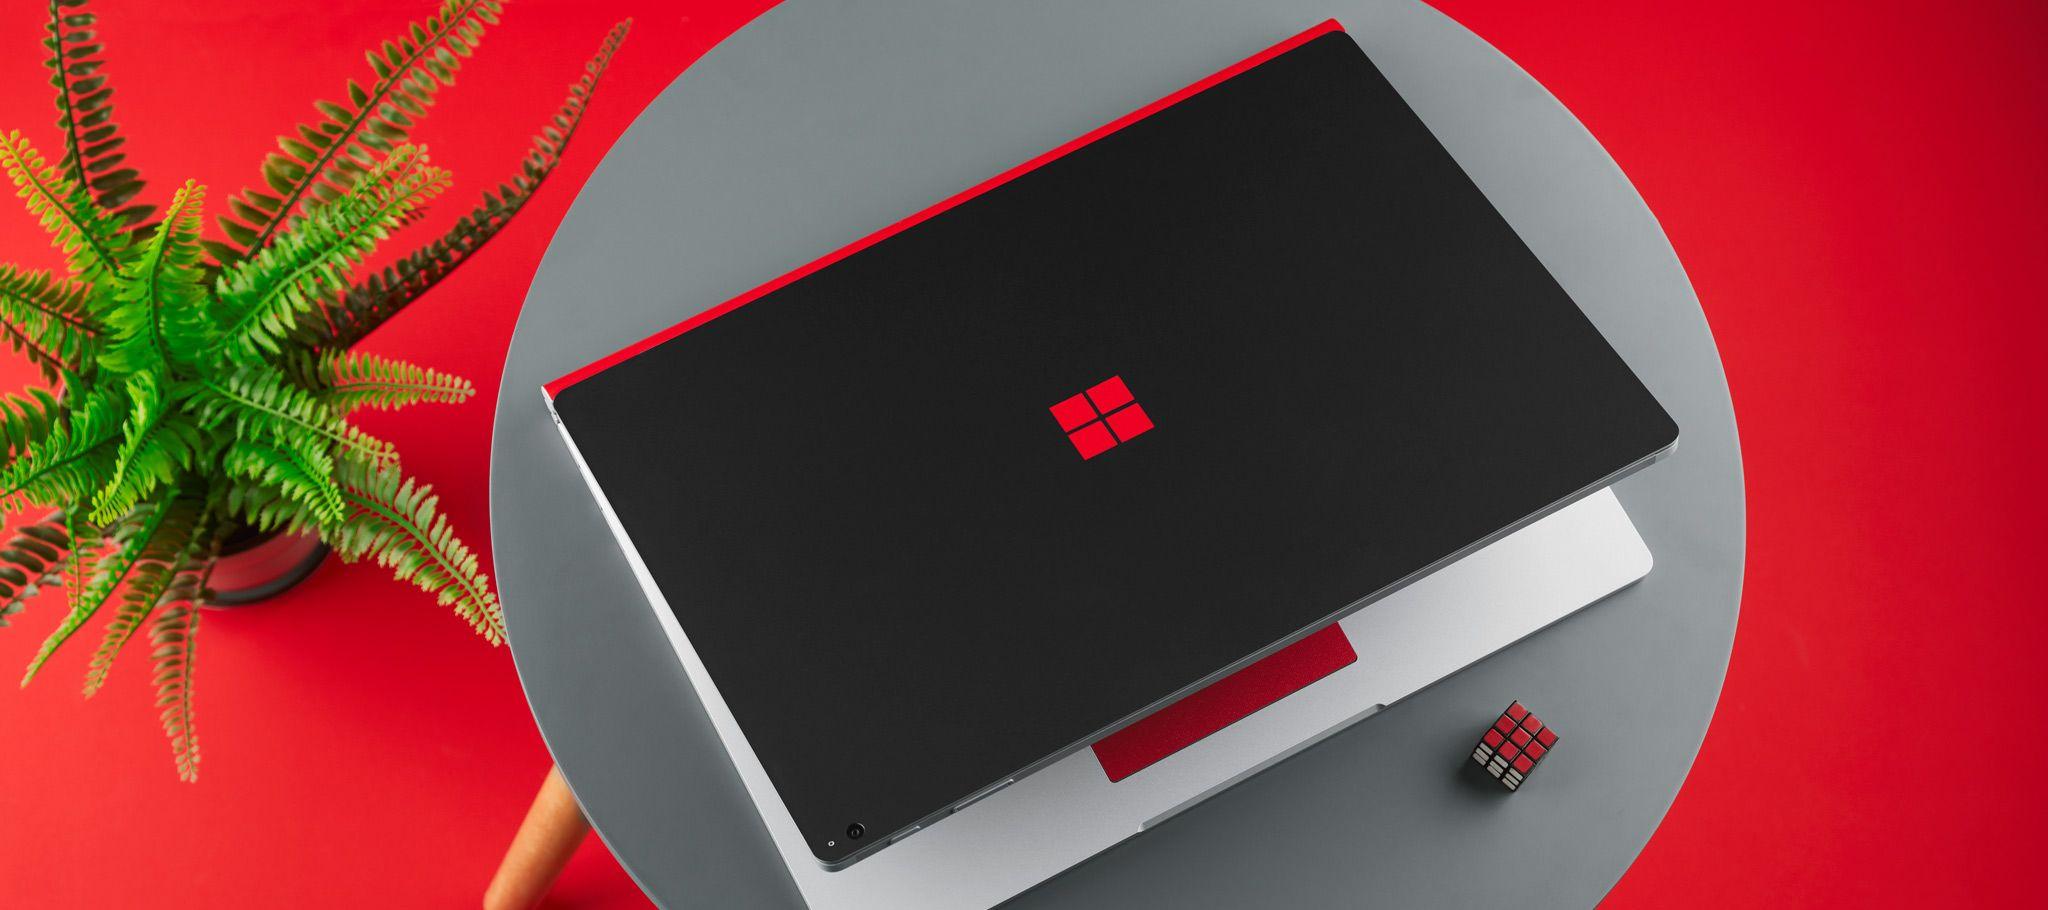 Red Square D Brand Logo - Surface Book Skins, Wraps & Covers » dbrand